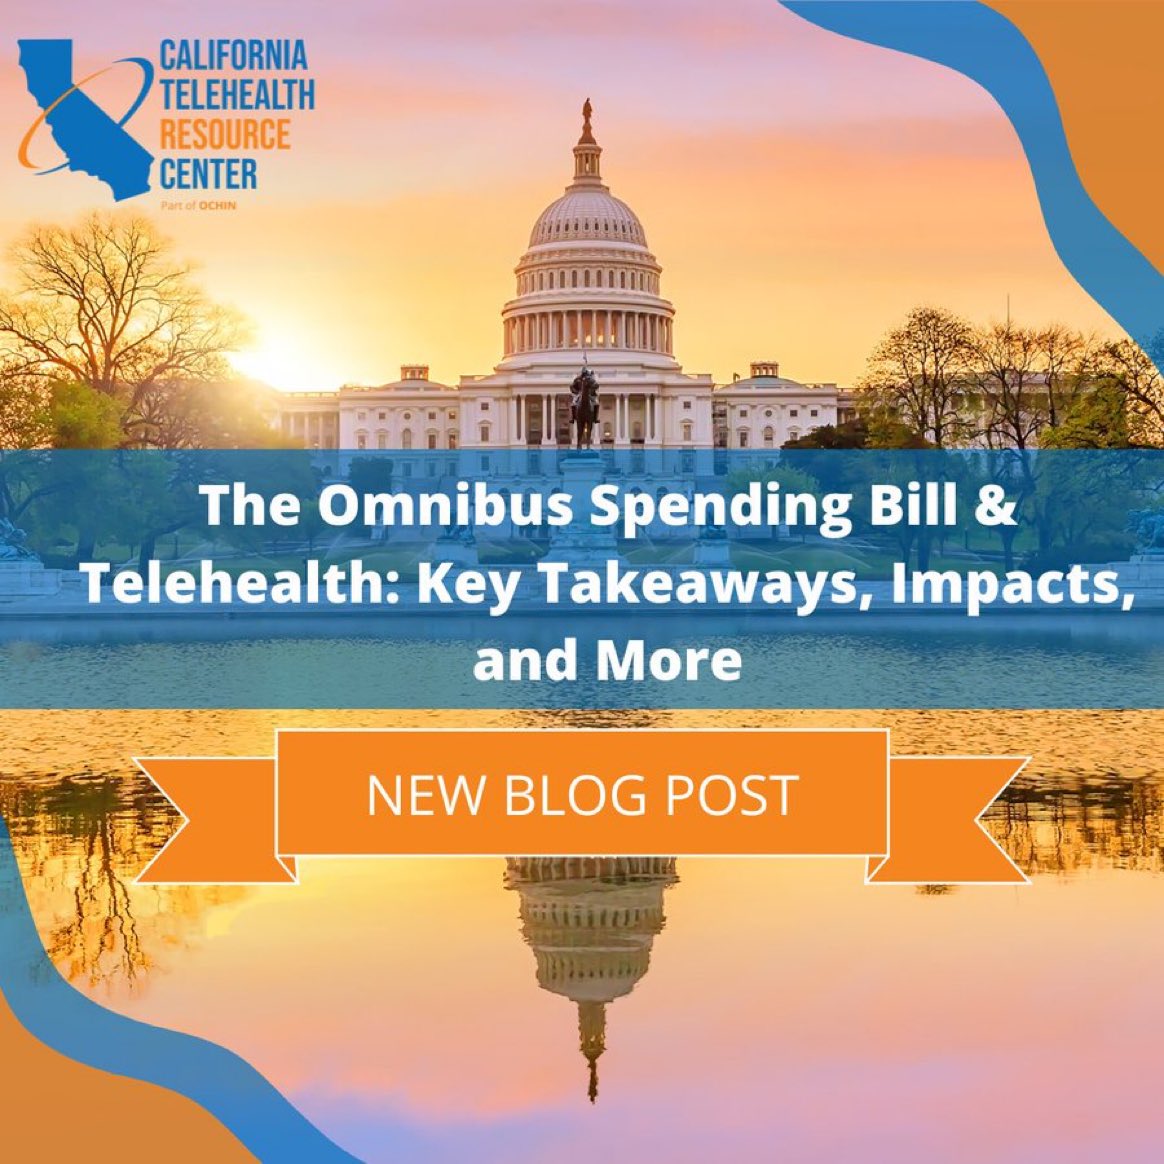 #HR2617, aka the 'Omnibus Bill,' boasts a number of changes to #telehealth legislation. To learn more about how your practice may be impacted, read our summary @CaliforniaTRC 

#omnibus #telehealth #healthcare #telehealthcare #spendingbill #legislation